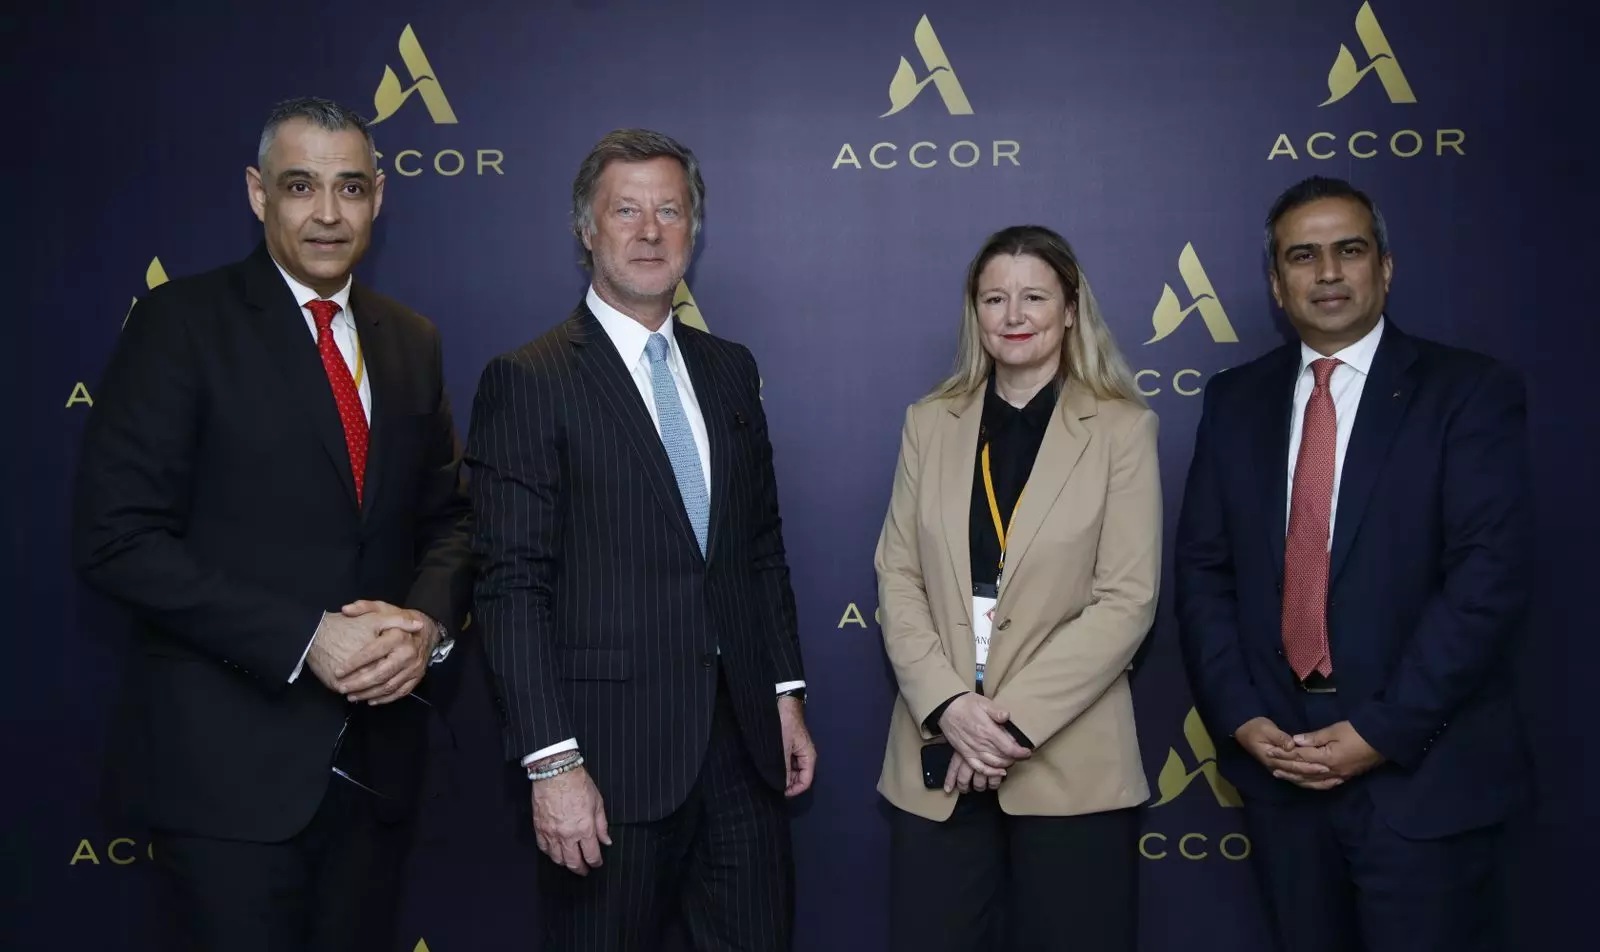 Sommet Education Foundation under the high patronage of Accor to develop Indian Talent Development Initiative